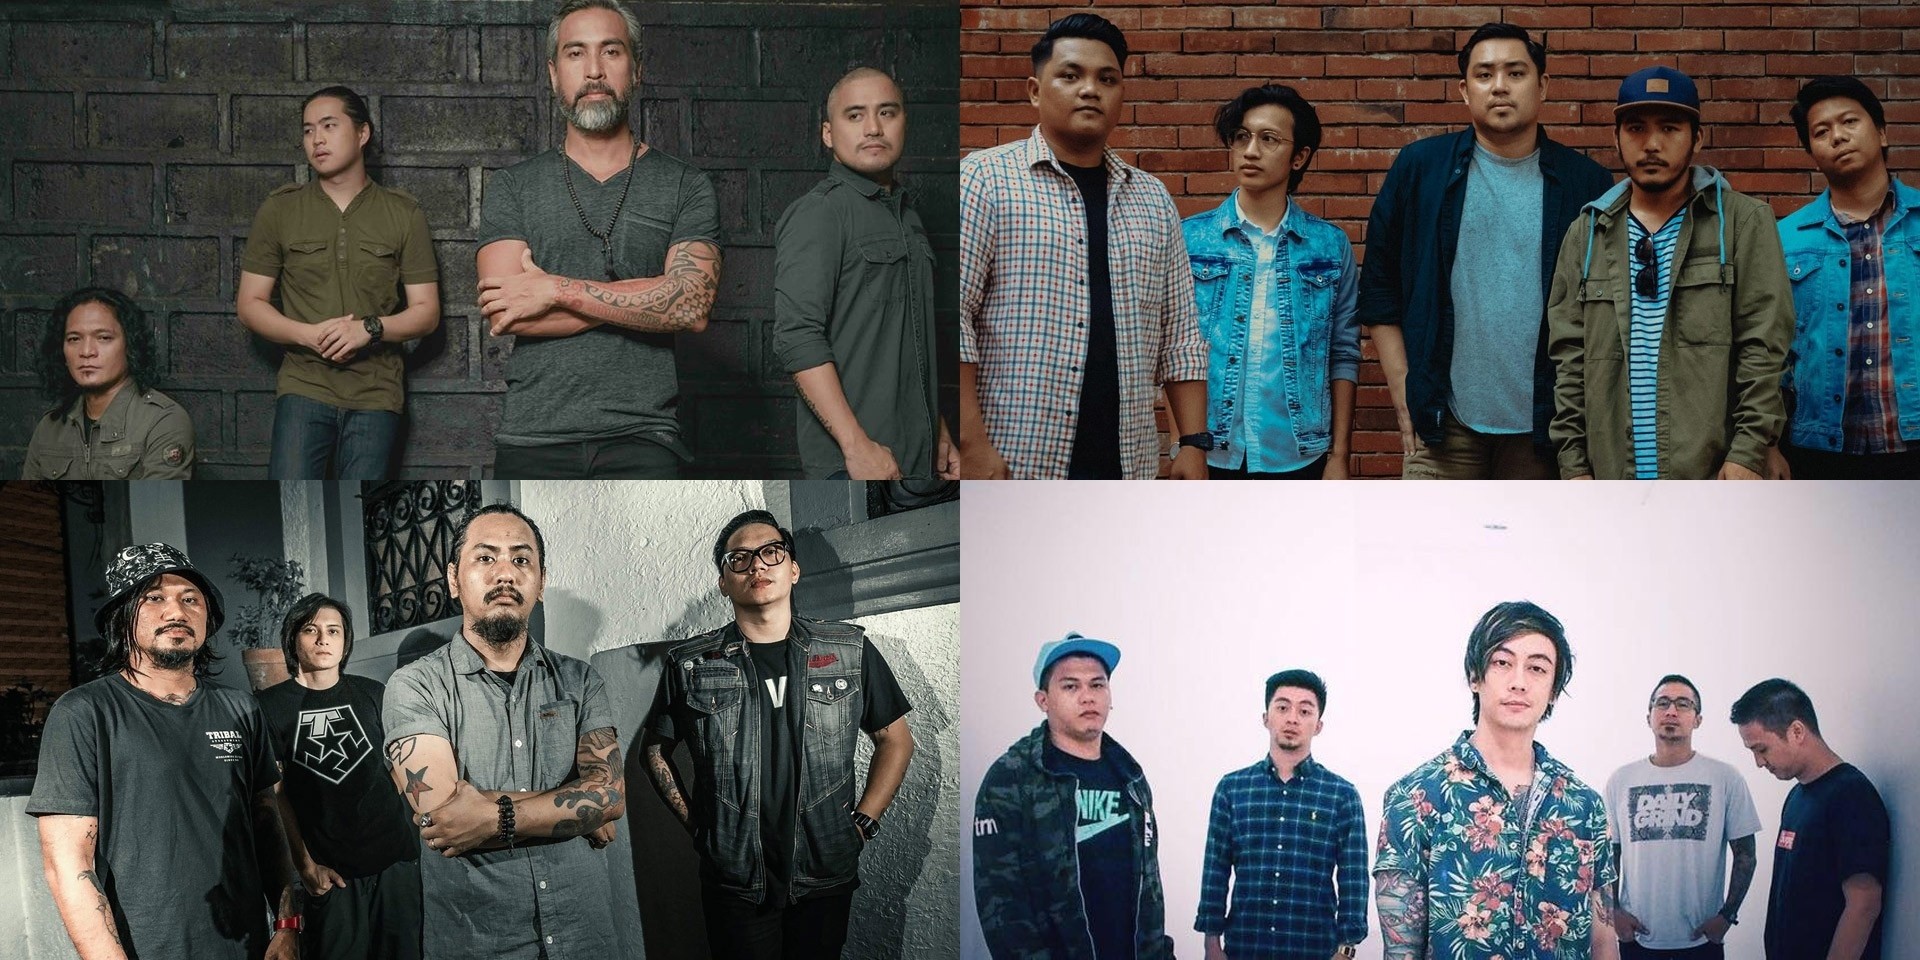 Threadfest heads to Katipunan with Franco, December Avenue, Typecast, Chicosci, and more